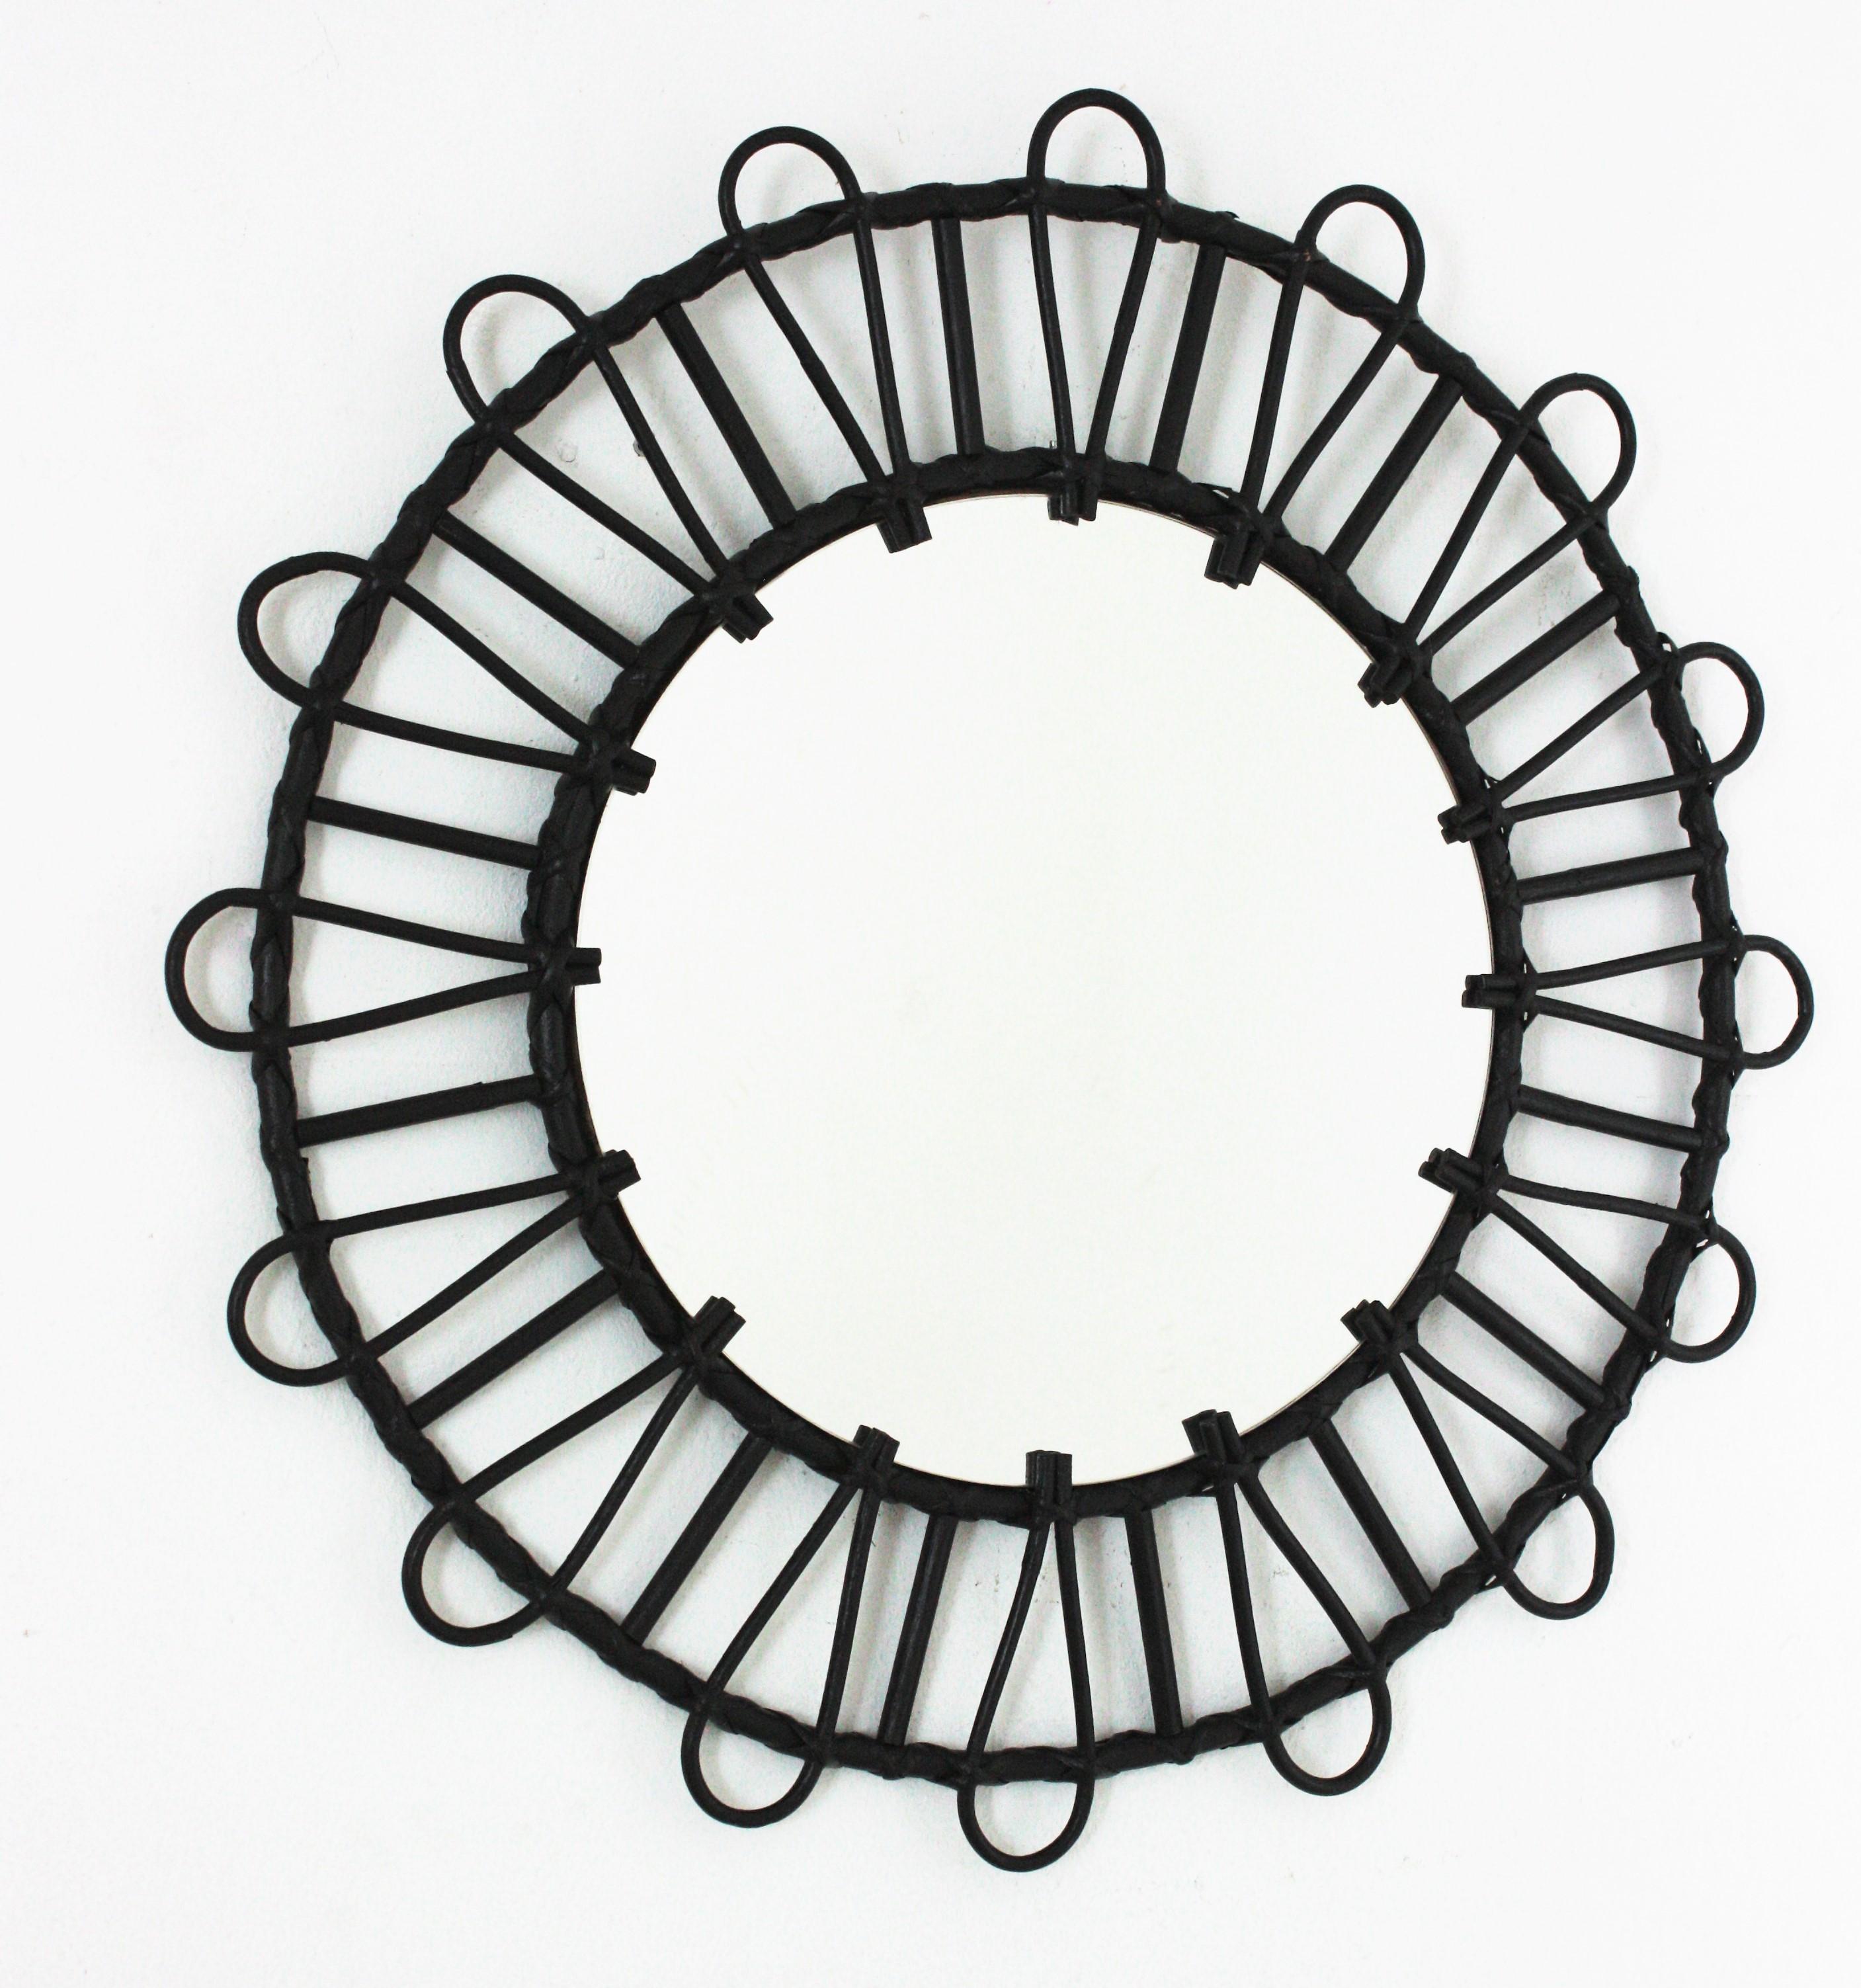 Black Mid-Century Modern Rattan mirror, Spain 1960s.
This handcrafted mirror features a round rattan frame with loop decorations placed in sunburst disposition.
This wall mirror would be a nice addition in a contemporary or classical ambiance.